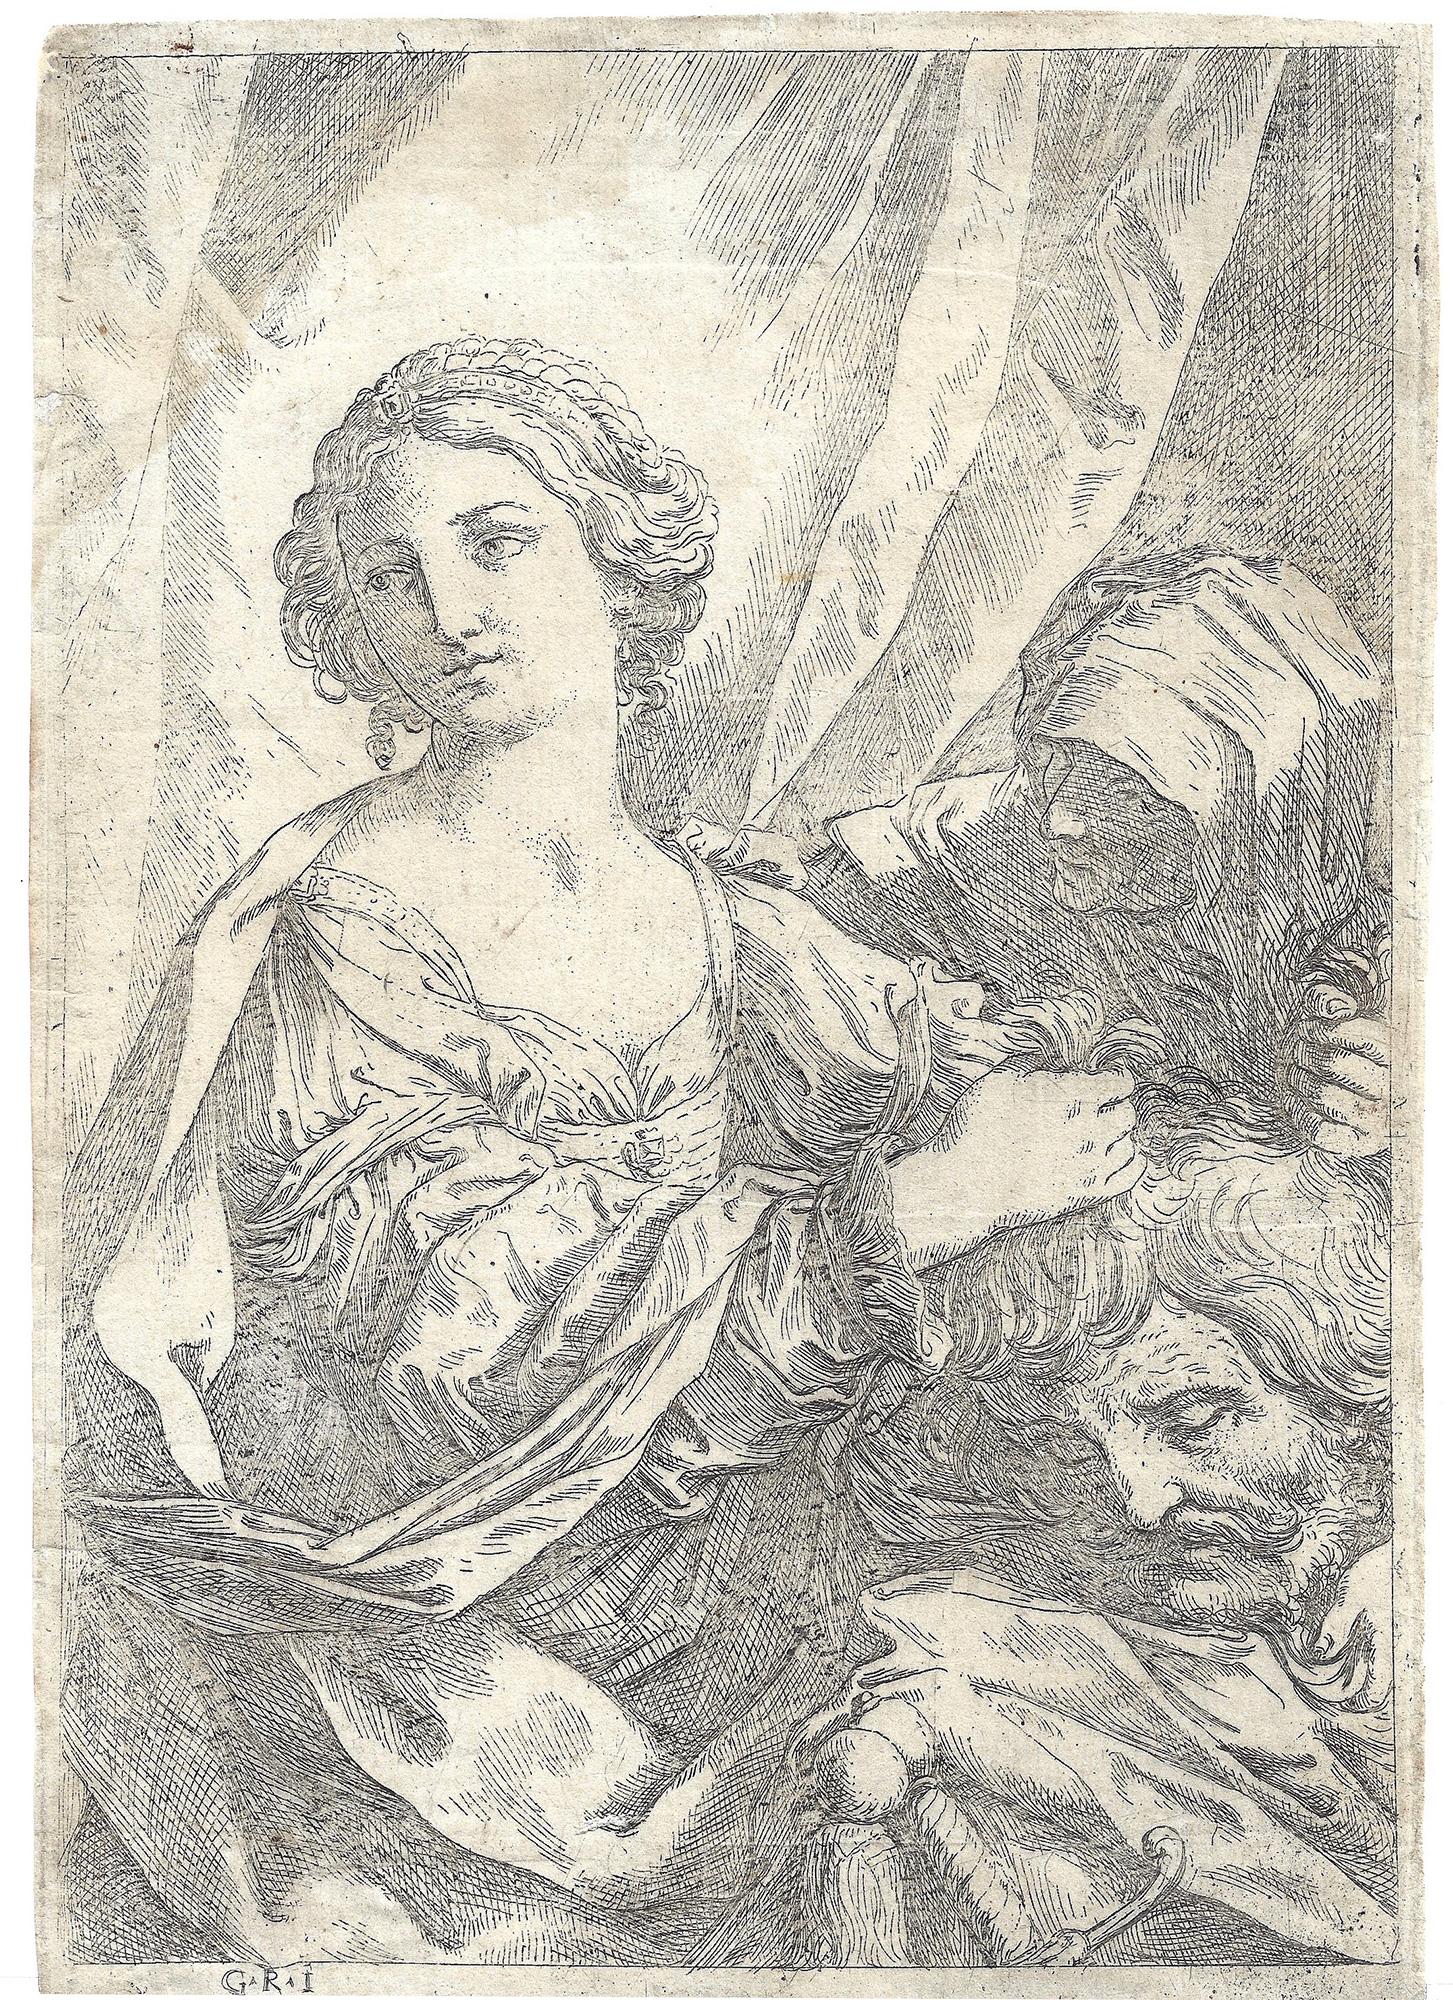 Judith Grasping The Head Of Holofernes By The Hair And Looking To The Left, and Old Woman to the Right. circa 1640
Etching on cream laid paper with a foolscap watermark, 10 x 7 inches (254 x 177 mm), thin margins. In good condition with some light